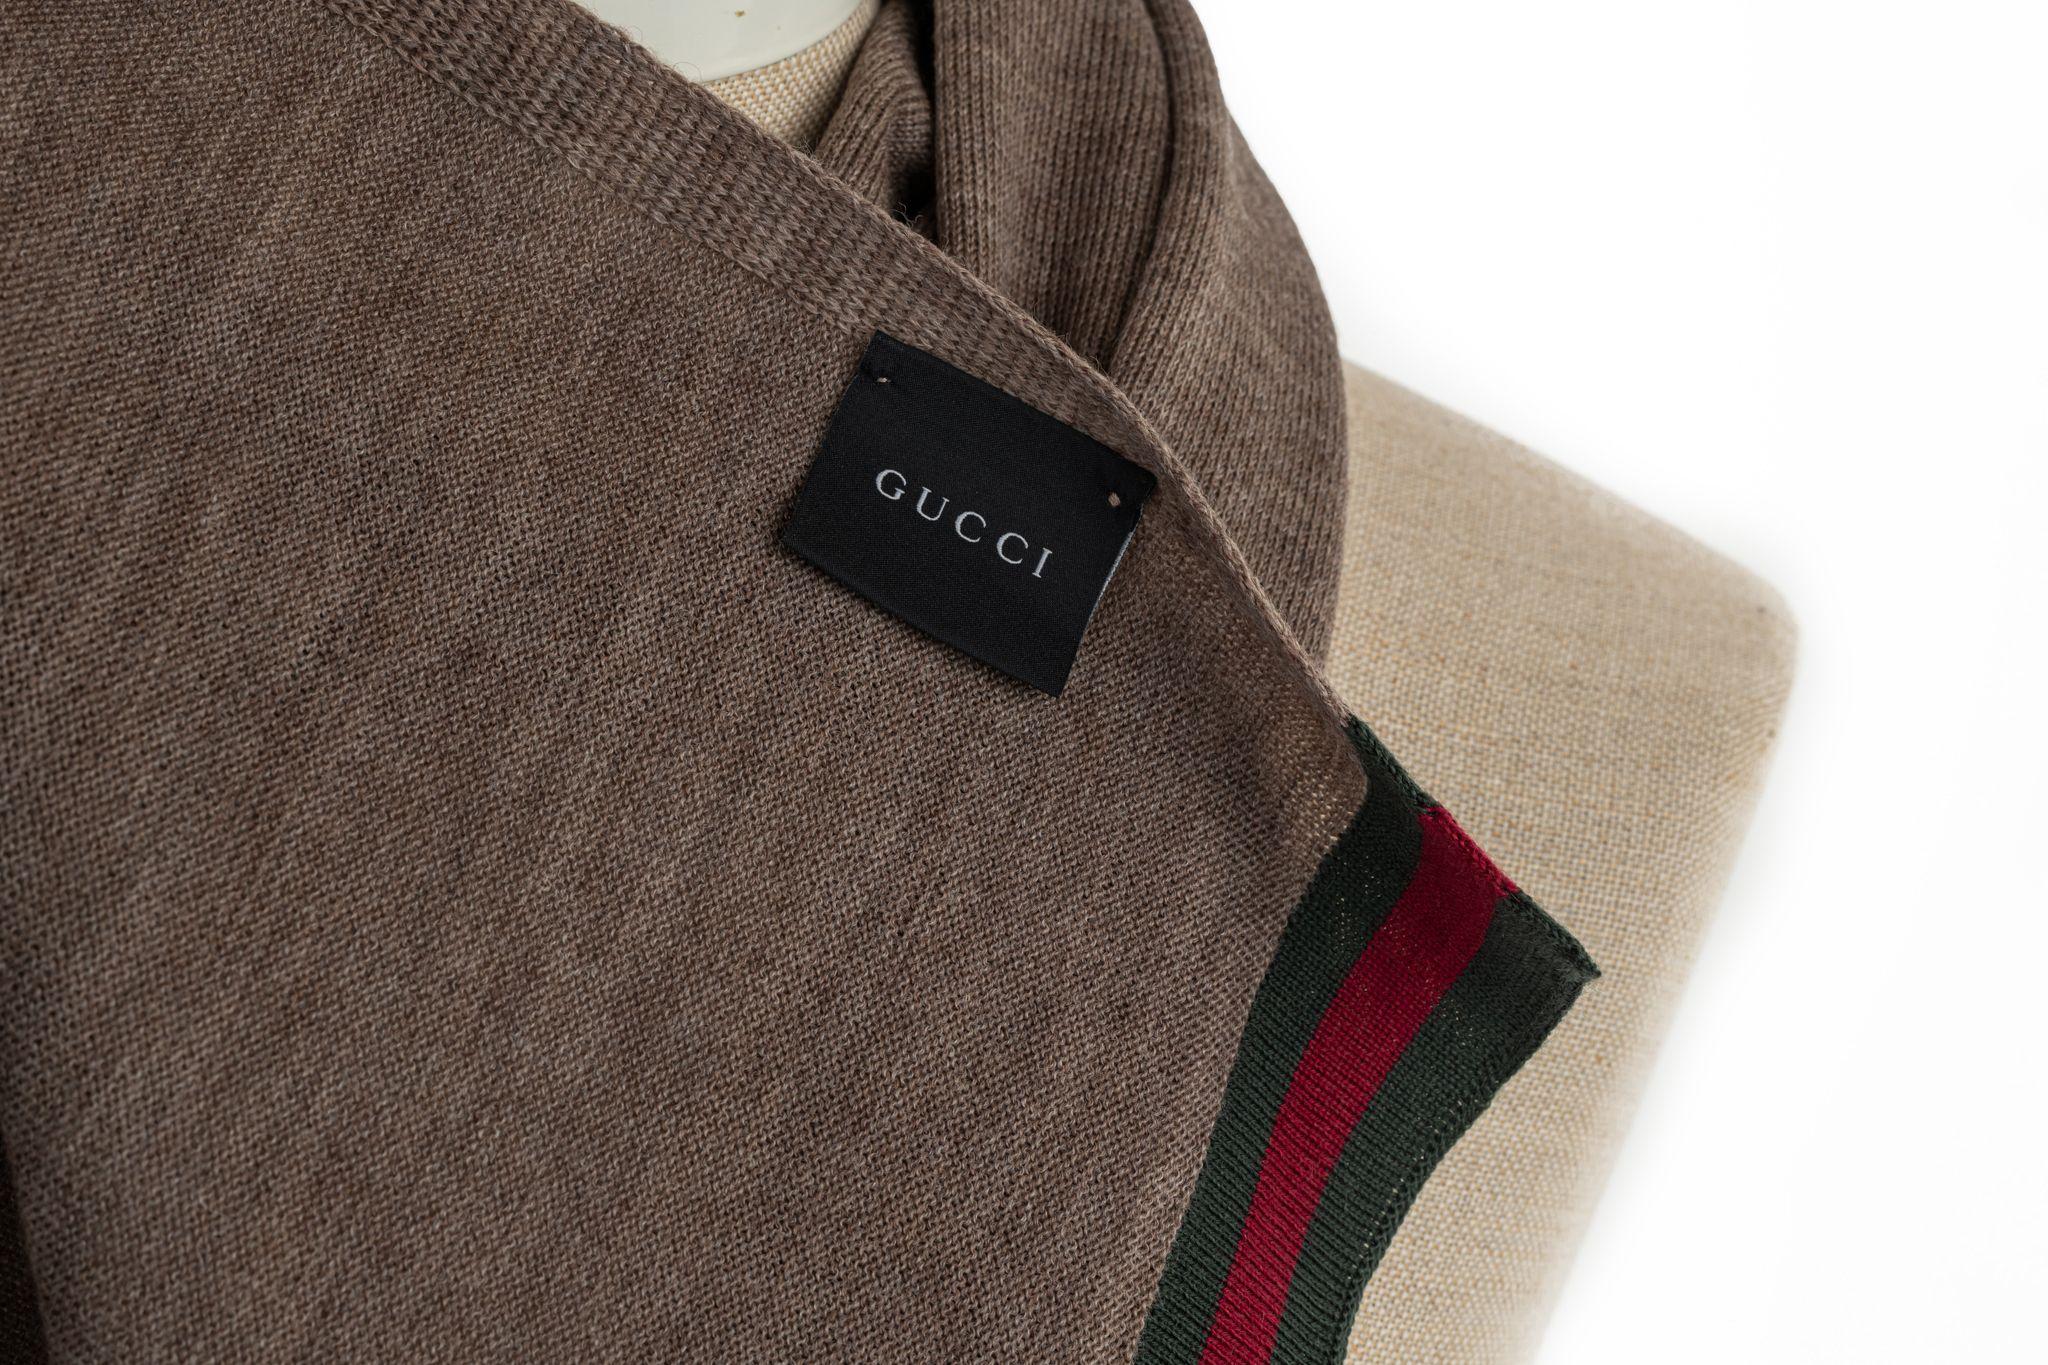 Gucci brown wool shawl. The ends of the item are colored in the traditional Gucci colors green and red. Piece is in new condition.